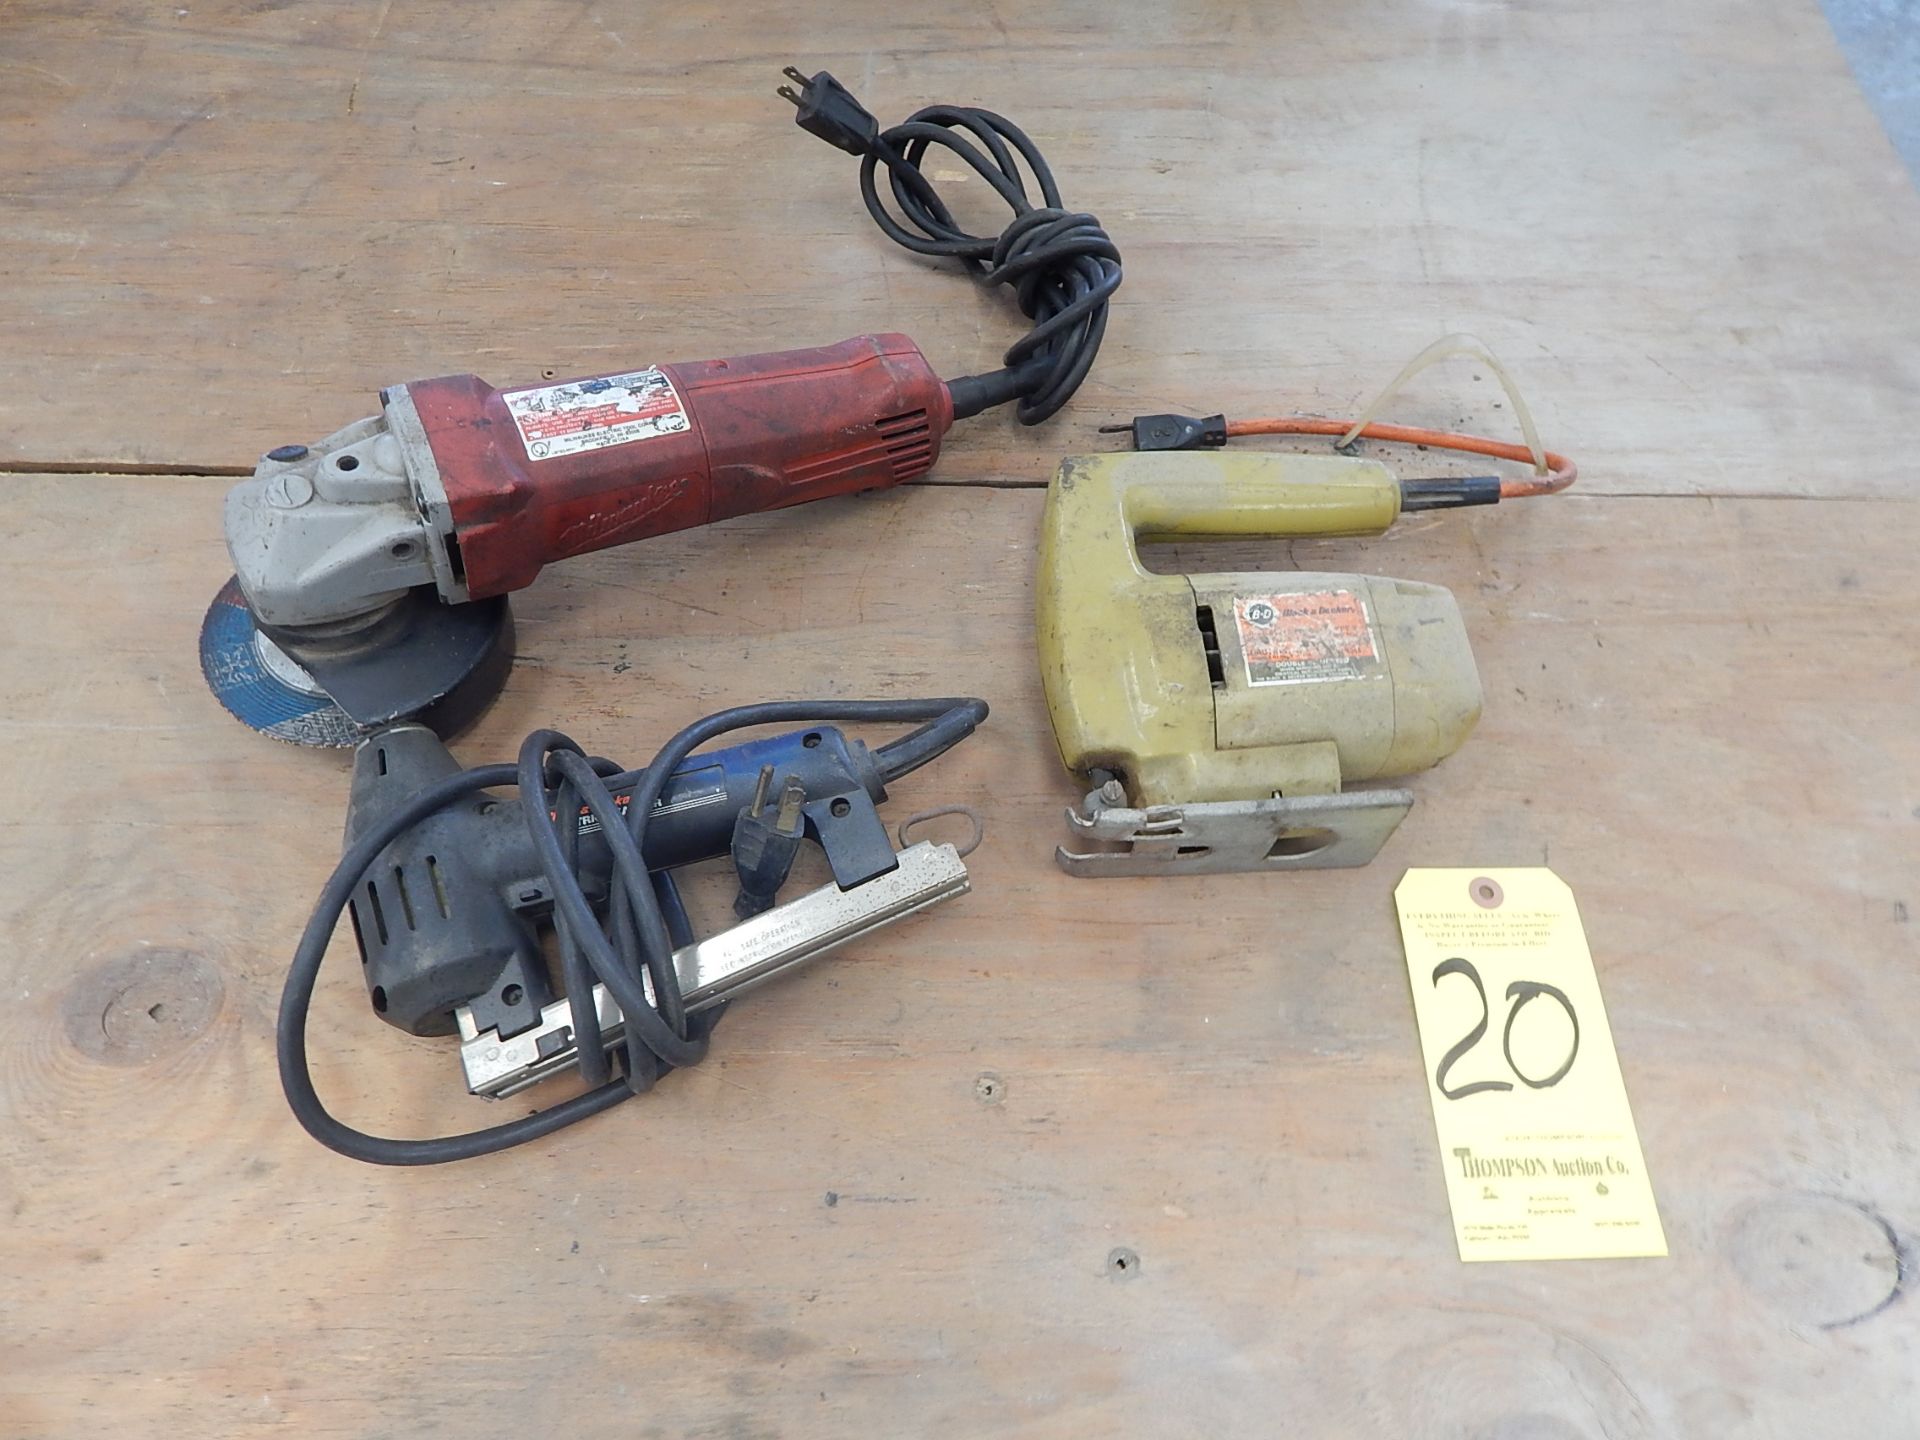 Lot, Milwaukee 4" Right Angle Grinder, Black & Decker Jig Saw, and Black & Decker Electric Stapler